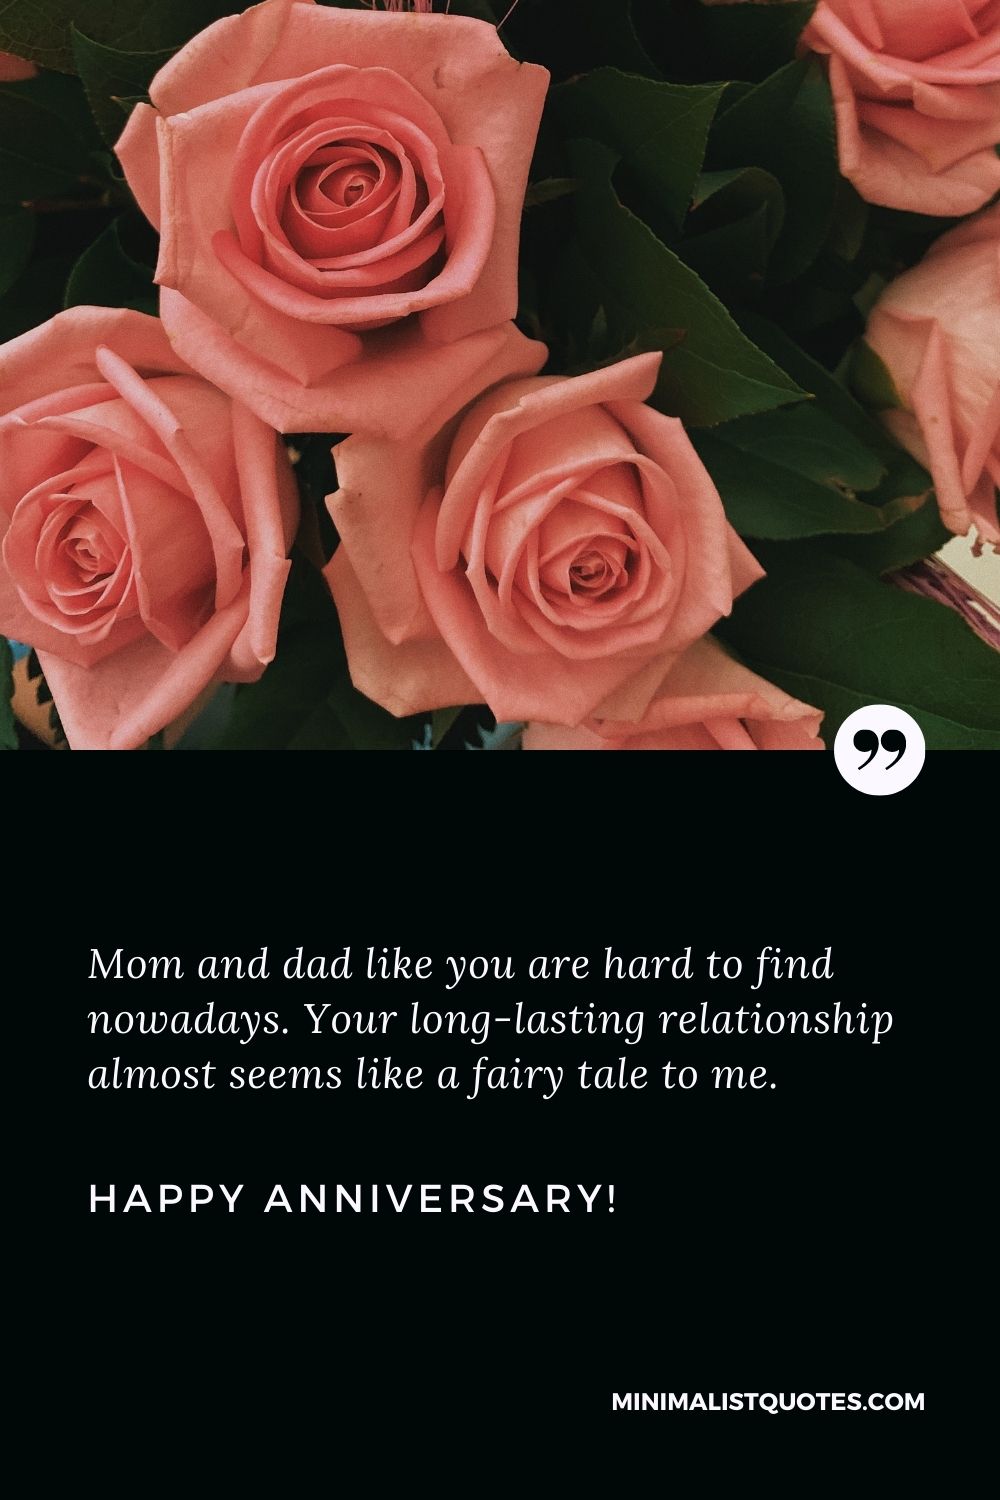 Mummy papa anniversary wishes: Mom and dad like you are hard to find nowadays. Your long-lasting relationship almost seems like a fairy tale to me. Happy Anniversary!